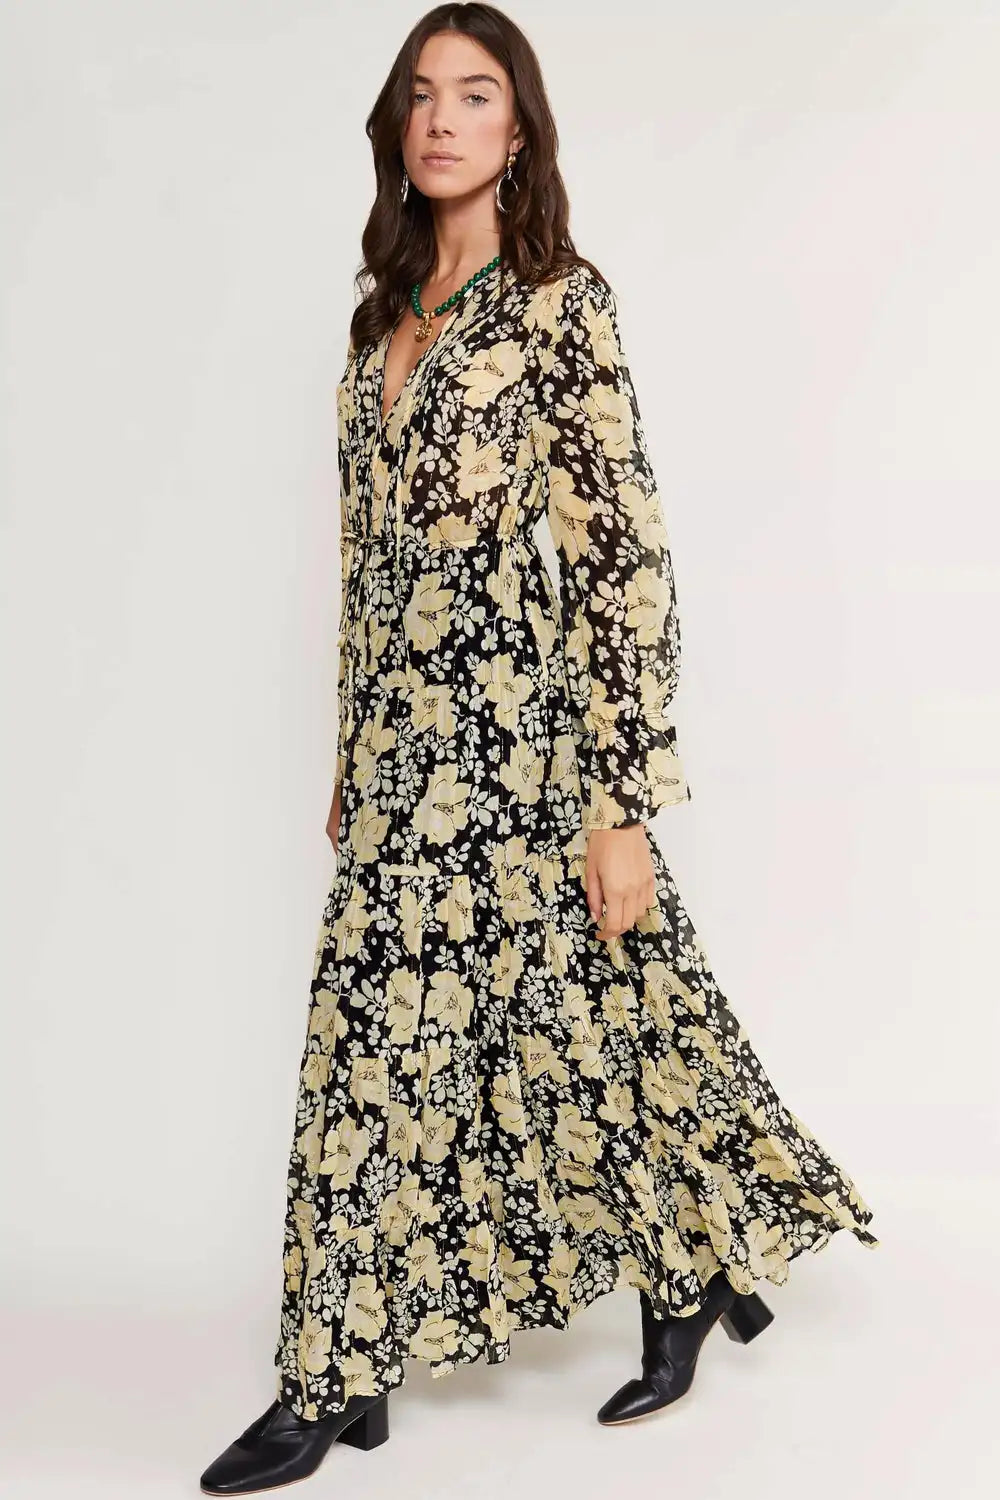 This Indigo Midi Dress is a must-have for any fashion lover. Handmade by a high-end designer, it exudes quality and sophistication. Perfect for shopping or banquets, its unique printed design will turn heads and make you stand out. Upgrade your wardrobe with this stunning and versatile dress today.